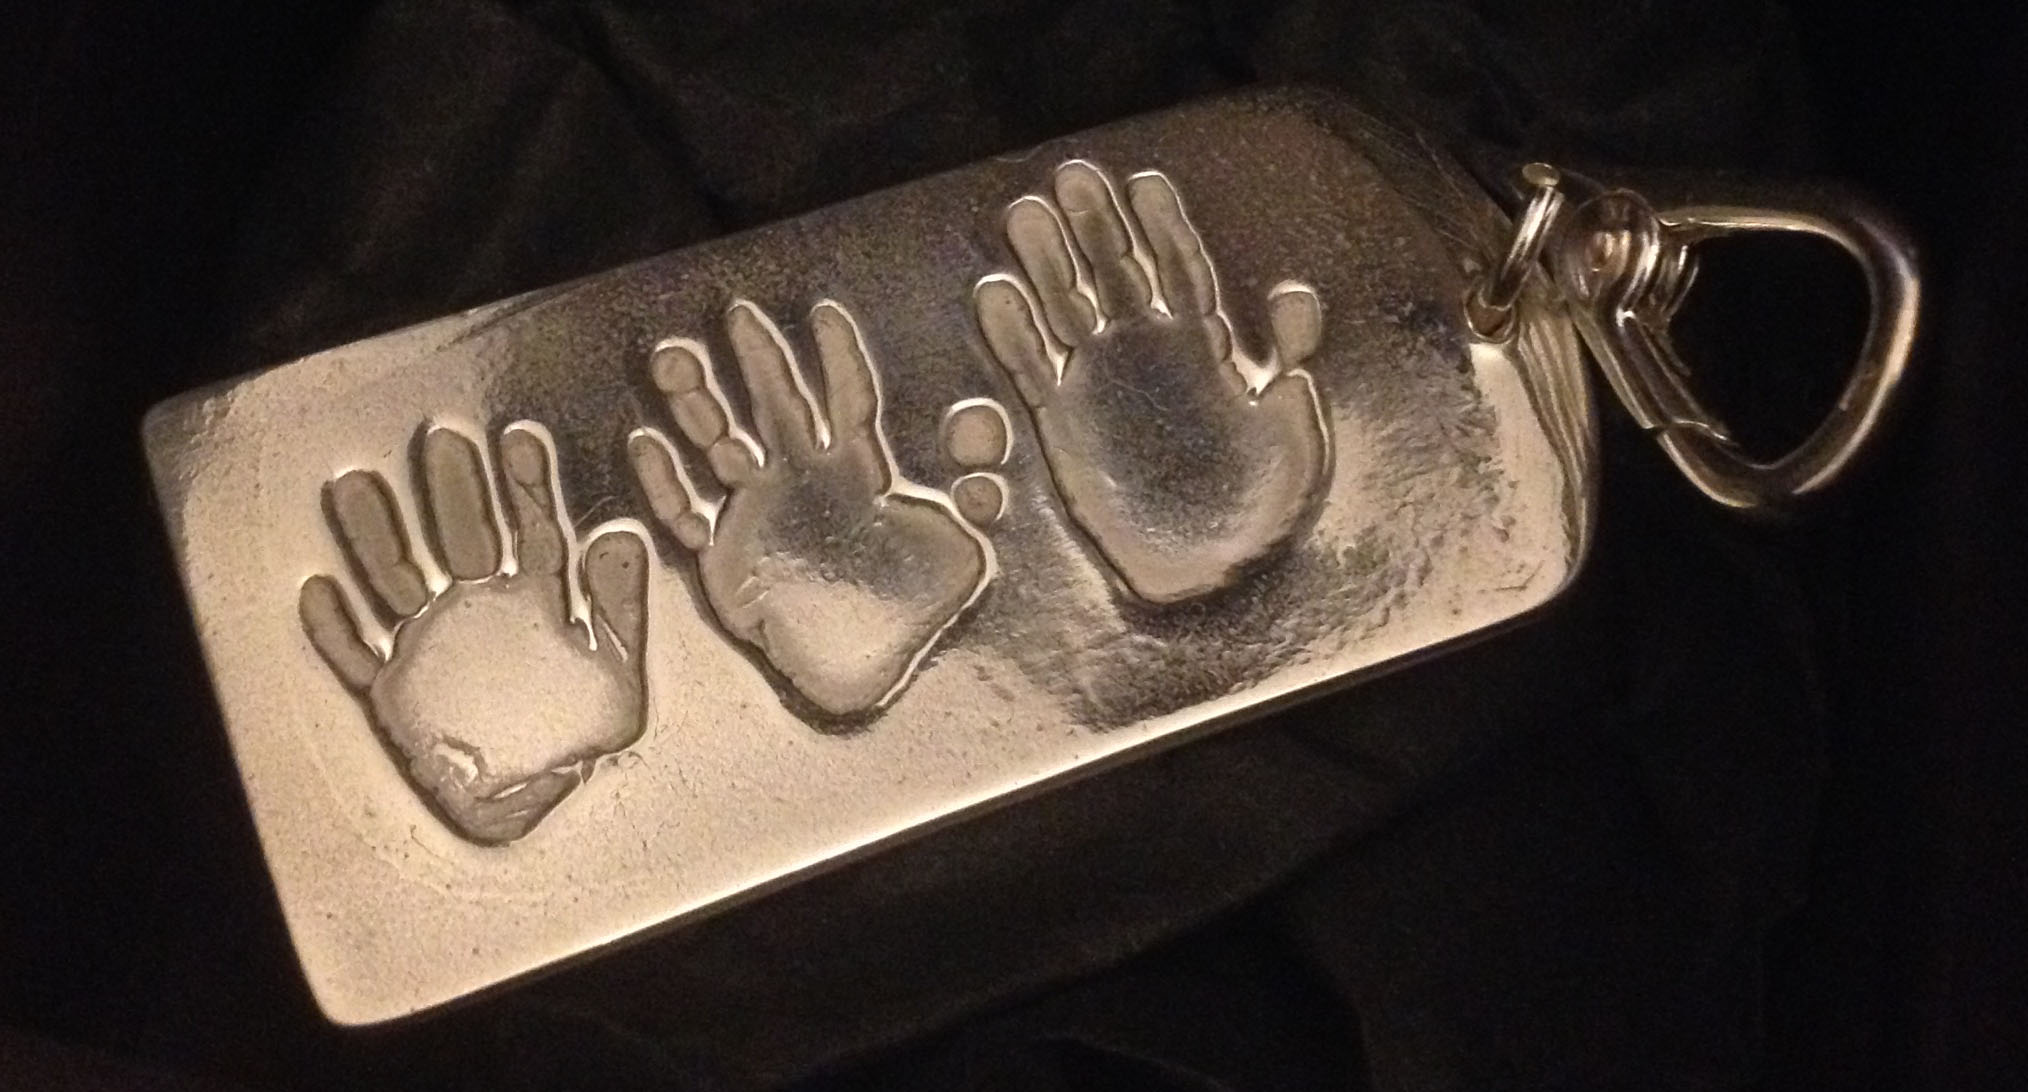 Silver key chain with hand prints